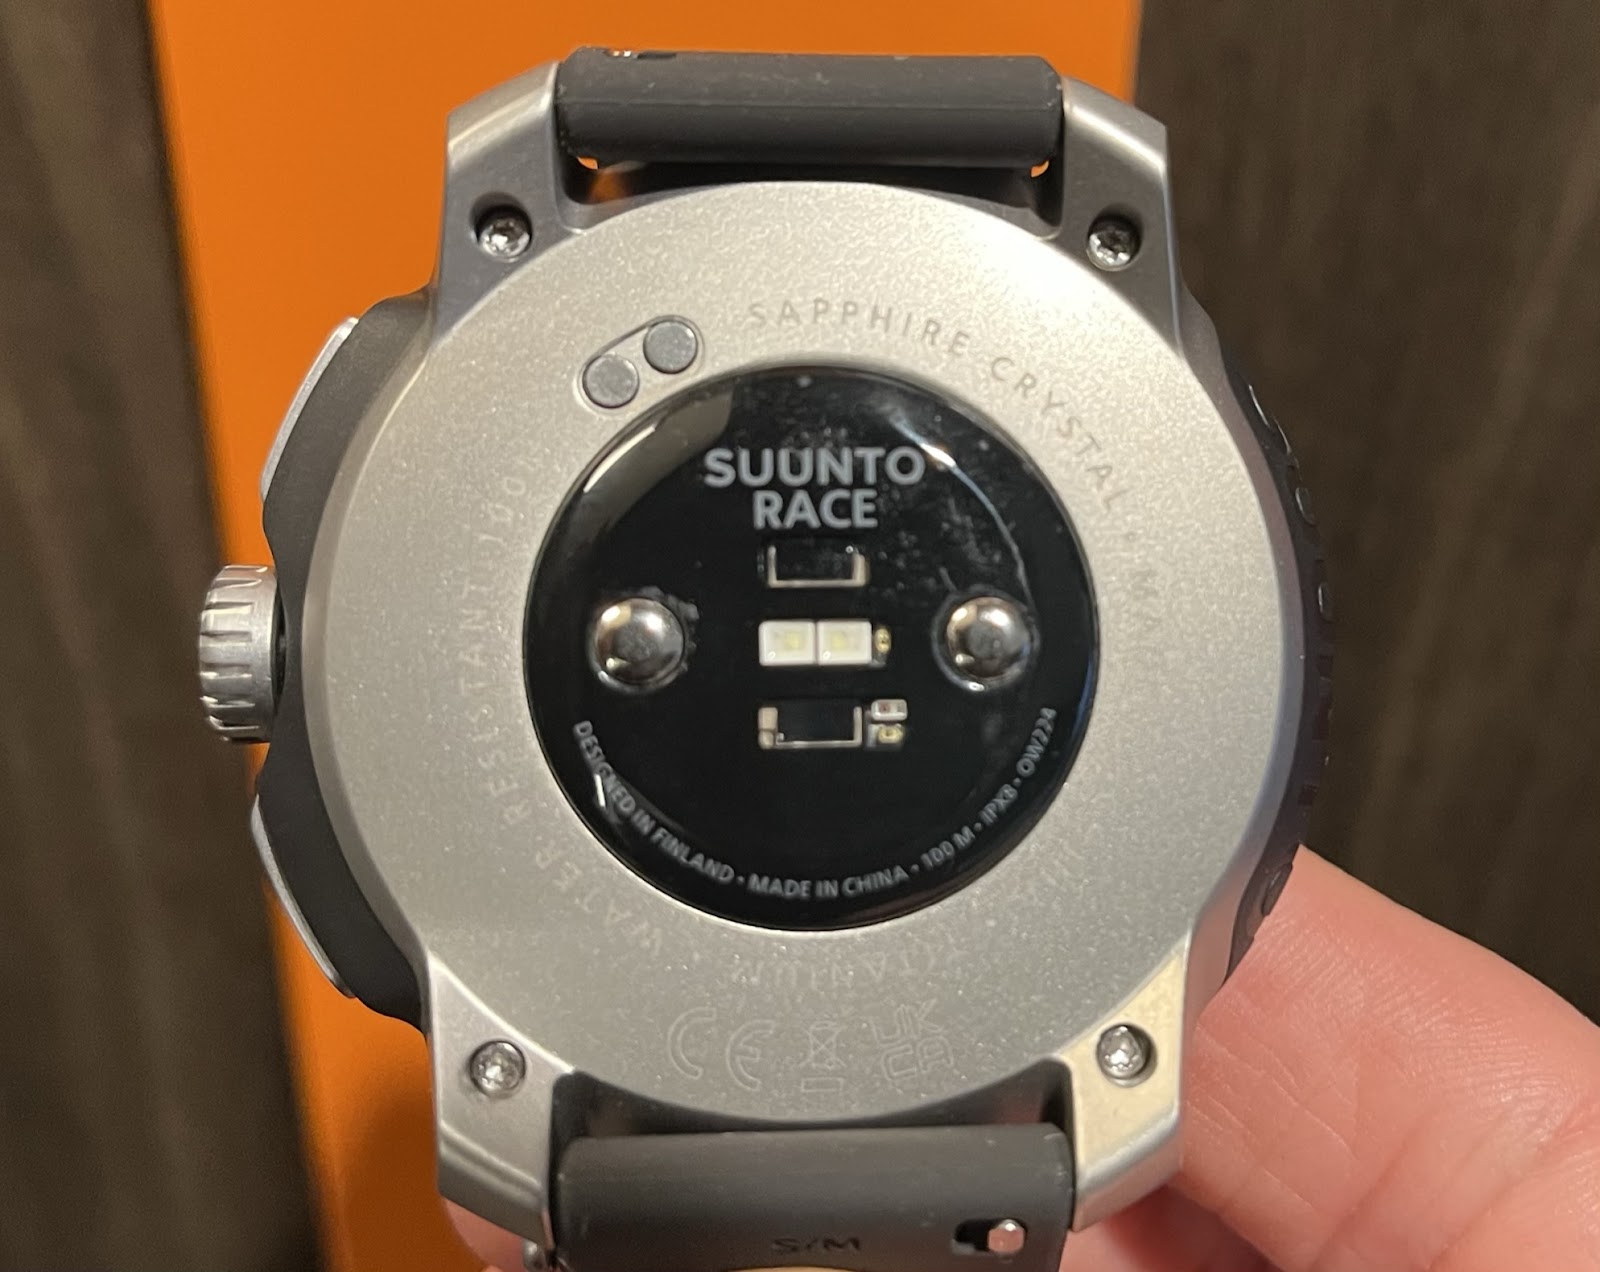 Road Trail Run: Suunto Race Hands On First Impressions & Testing